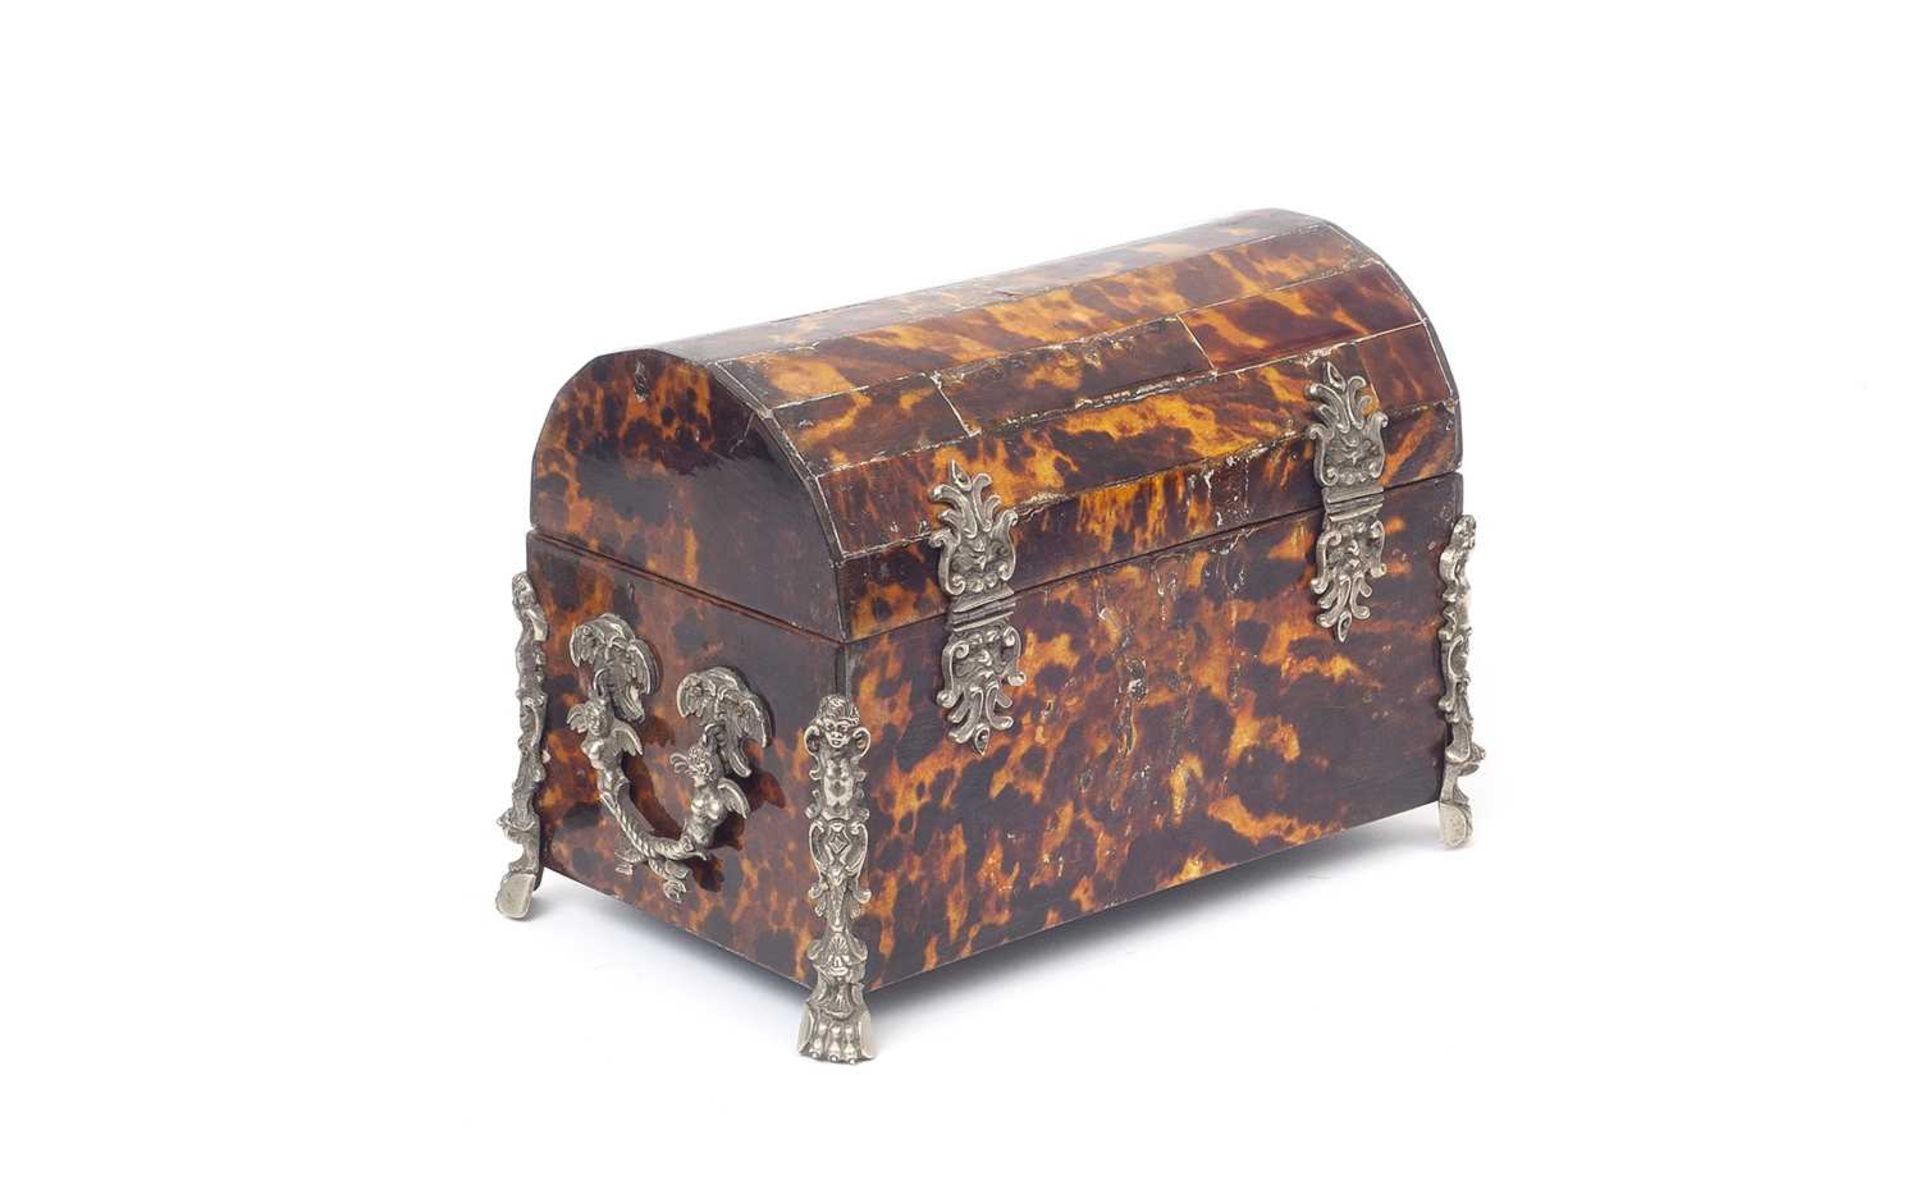 AN 18TH CENTURY DUTCH COLONIAL TORTOISESHELL AND SILVERED METAL MOUNTED CASKET - Image 3 of 4